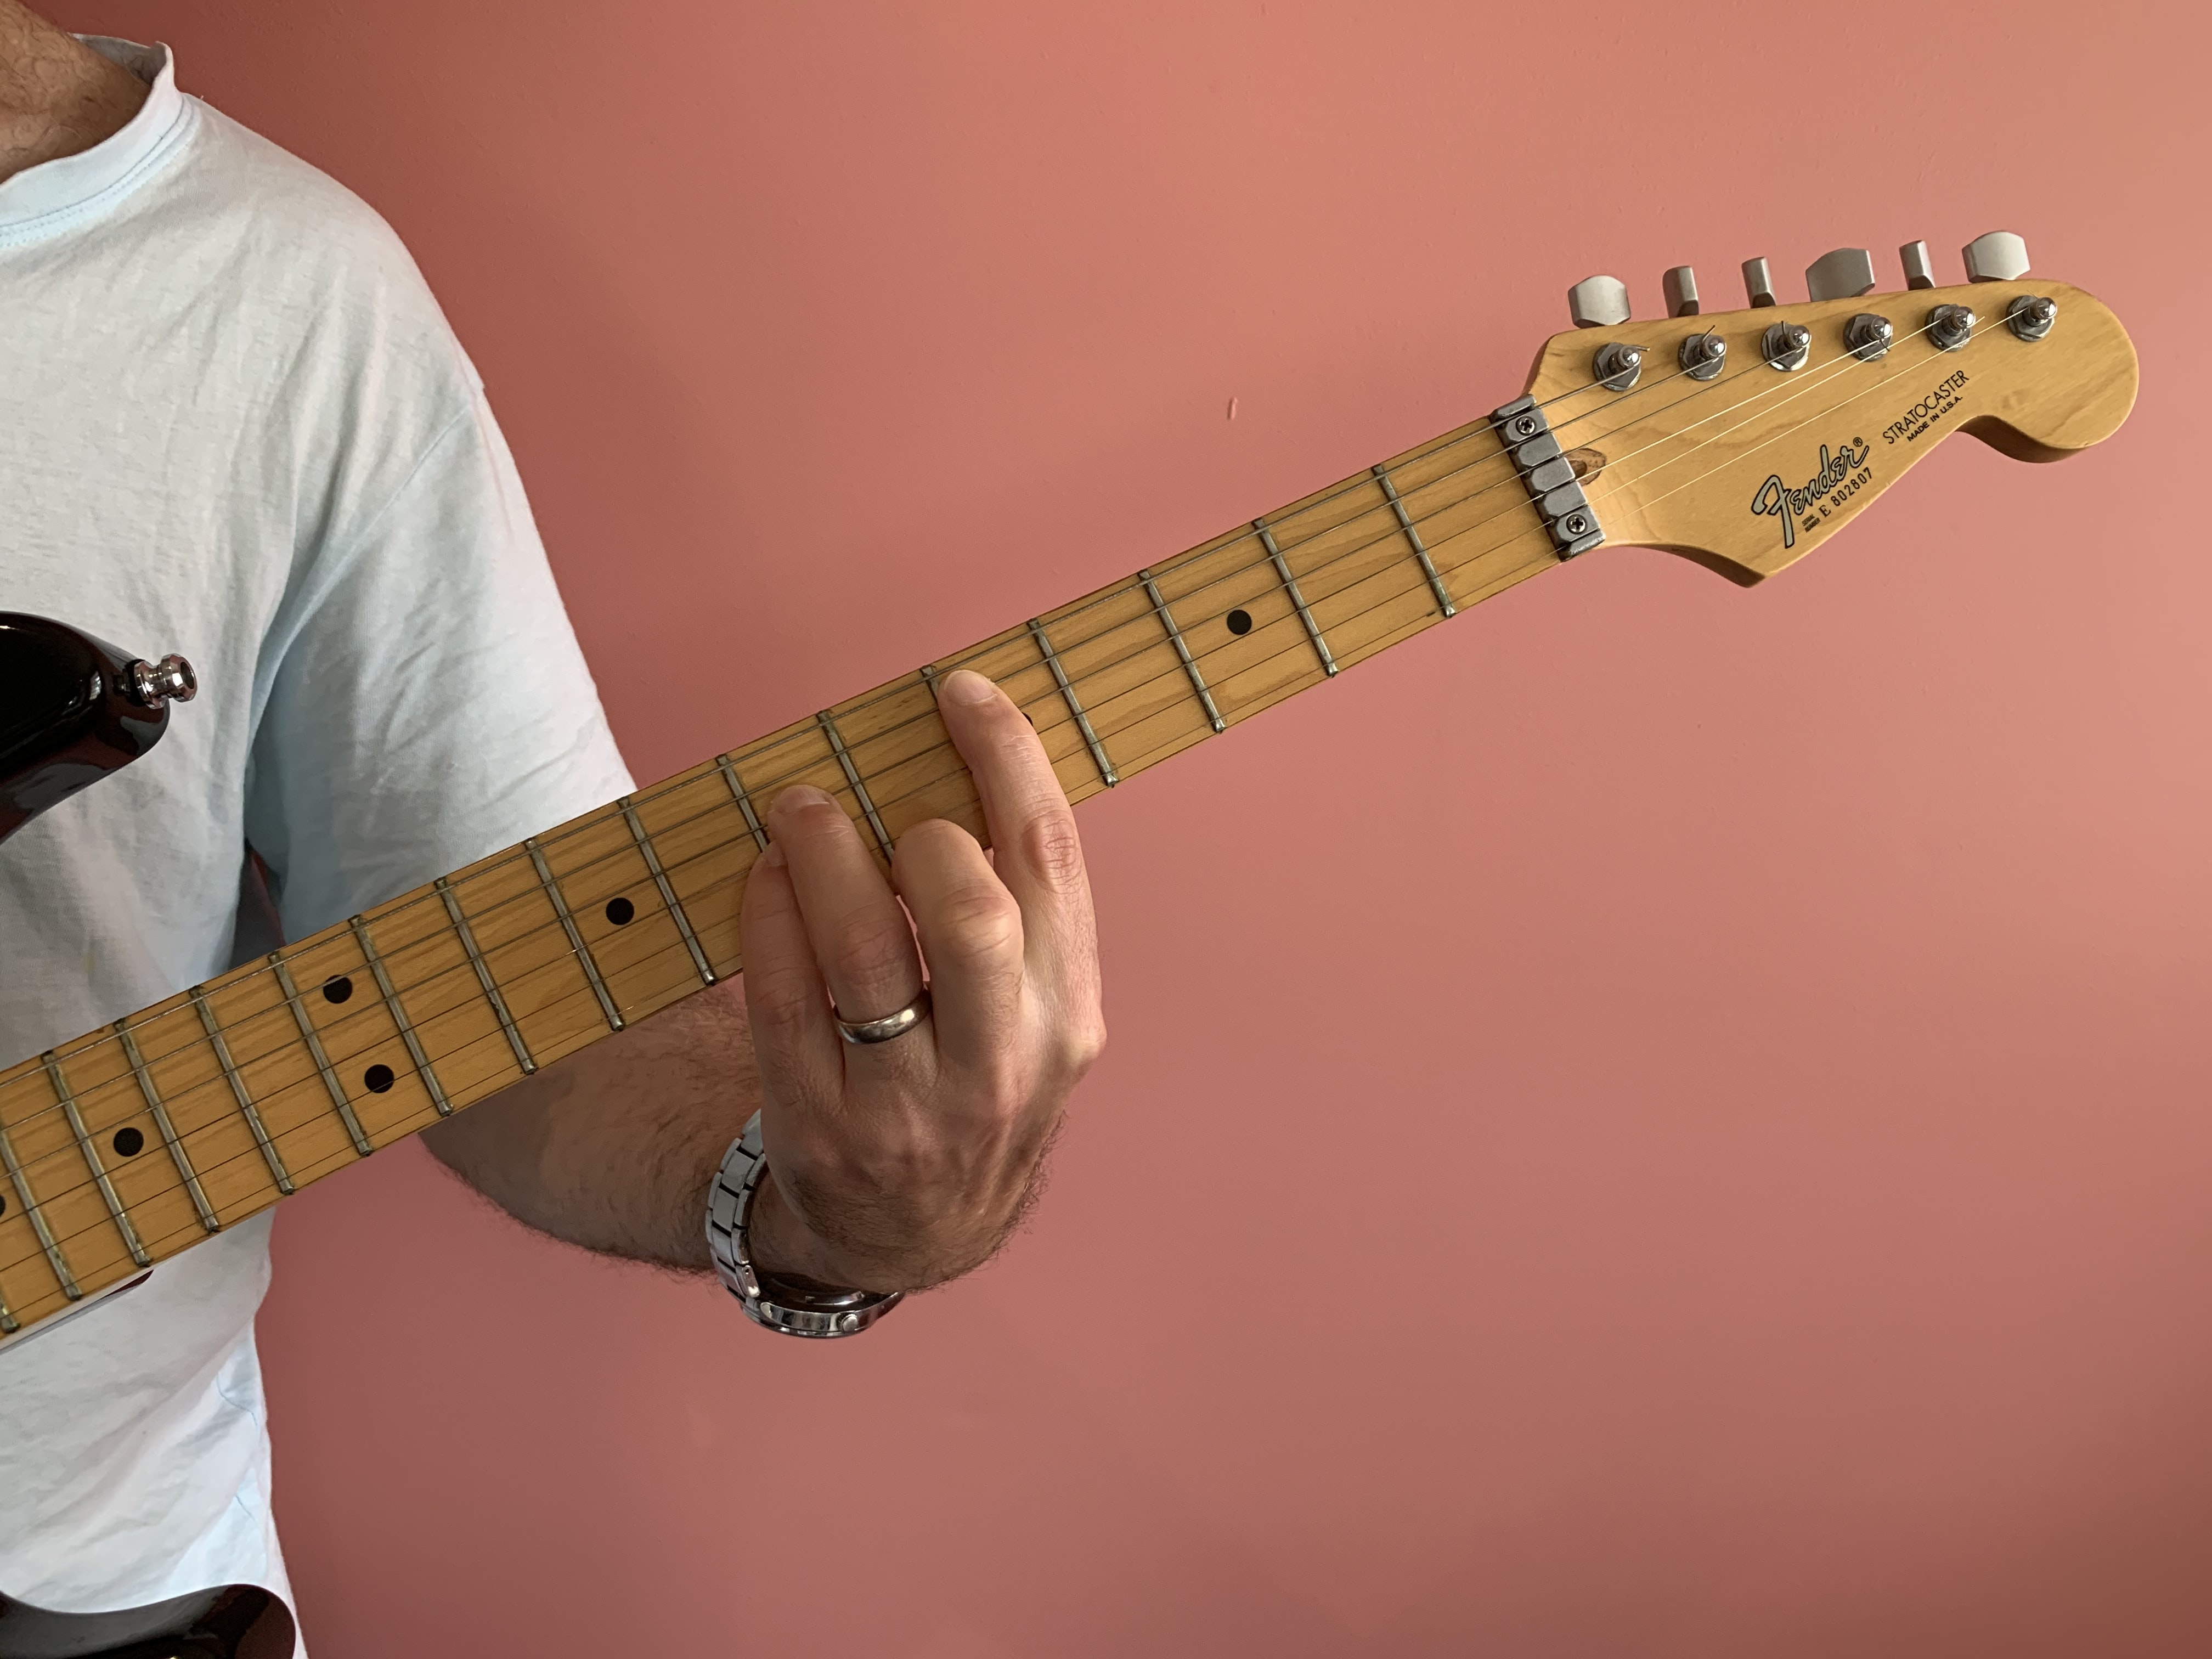 Image of person playing guitar. Their fingers are closed close to (but not on) the fret rod closest to the tone hole.